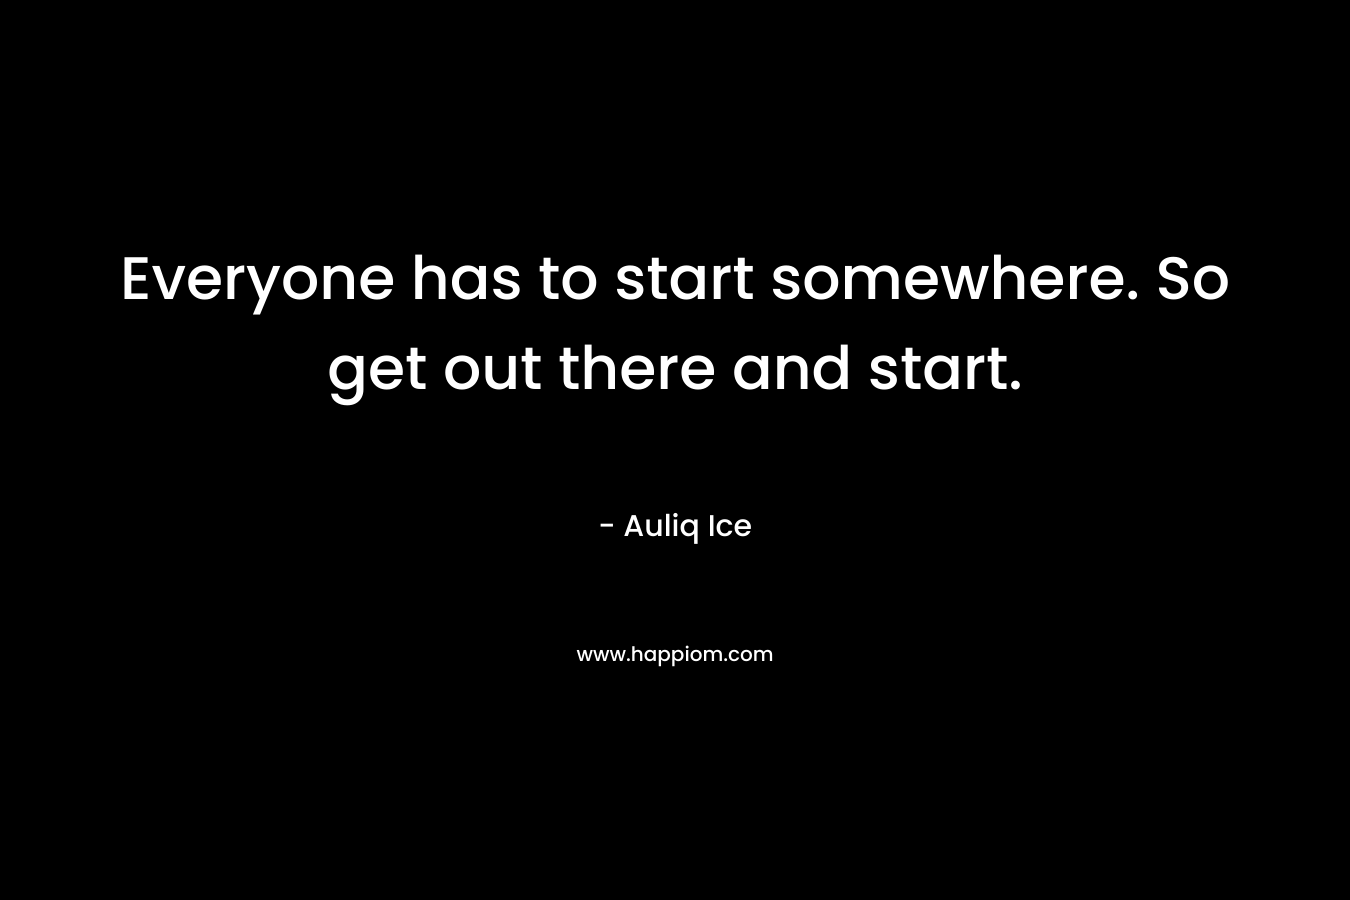 Everyone has to start somewhere. So get out there and start.